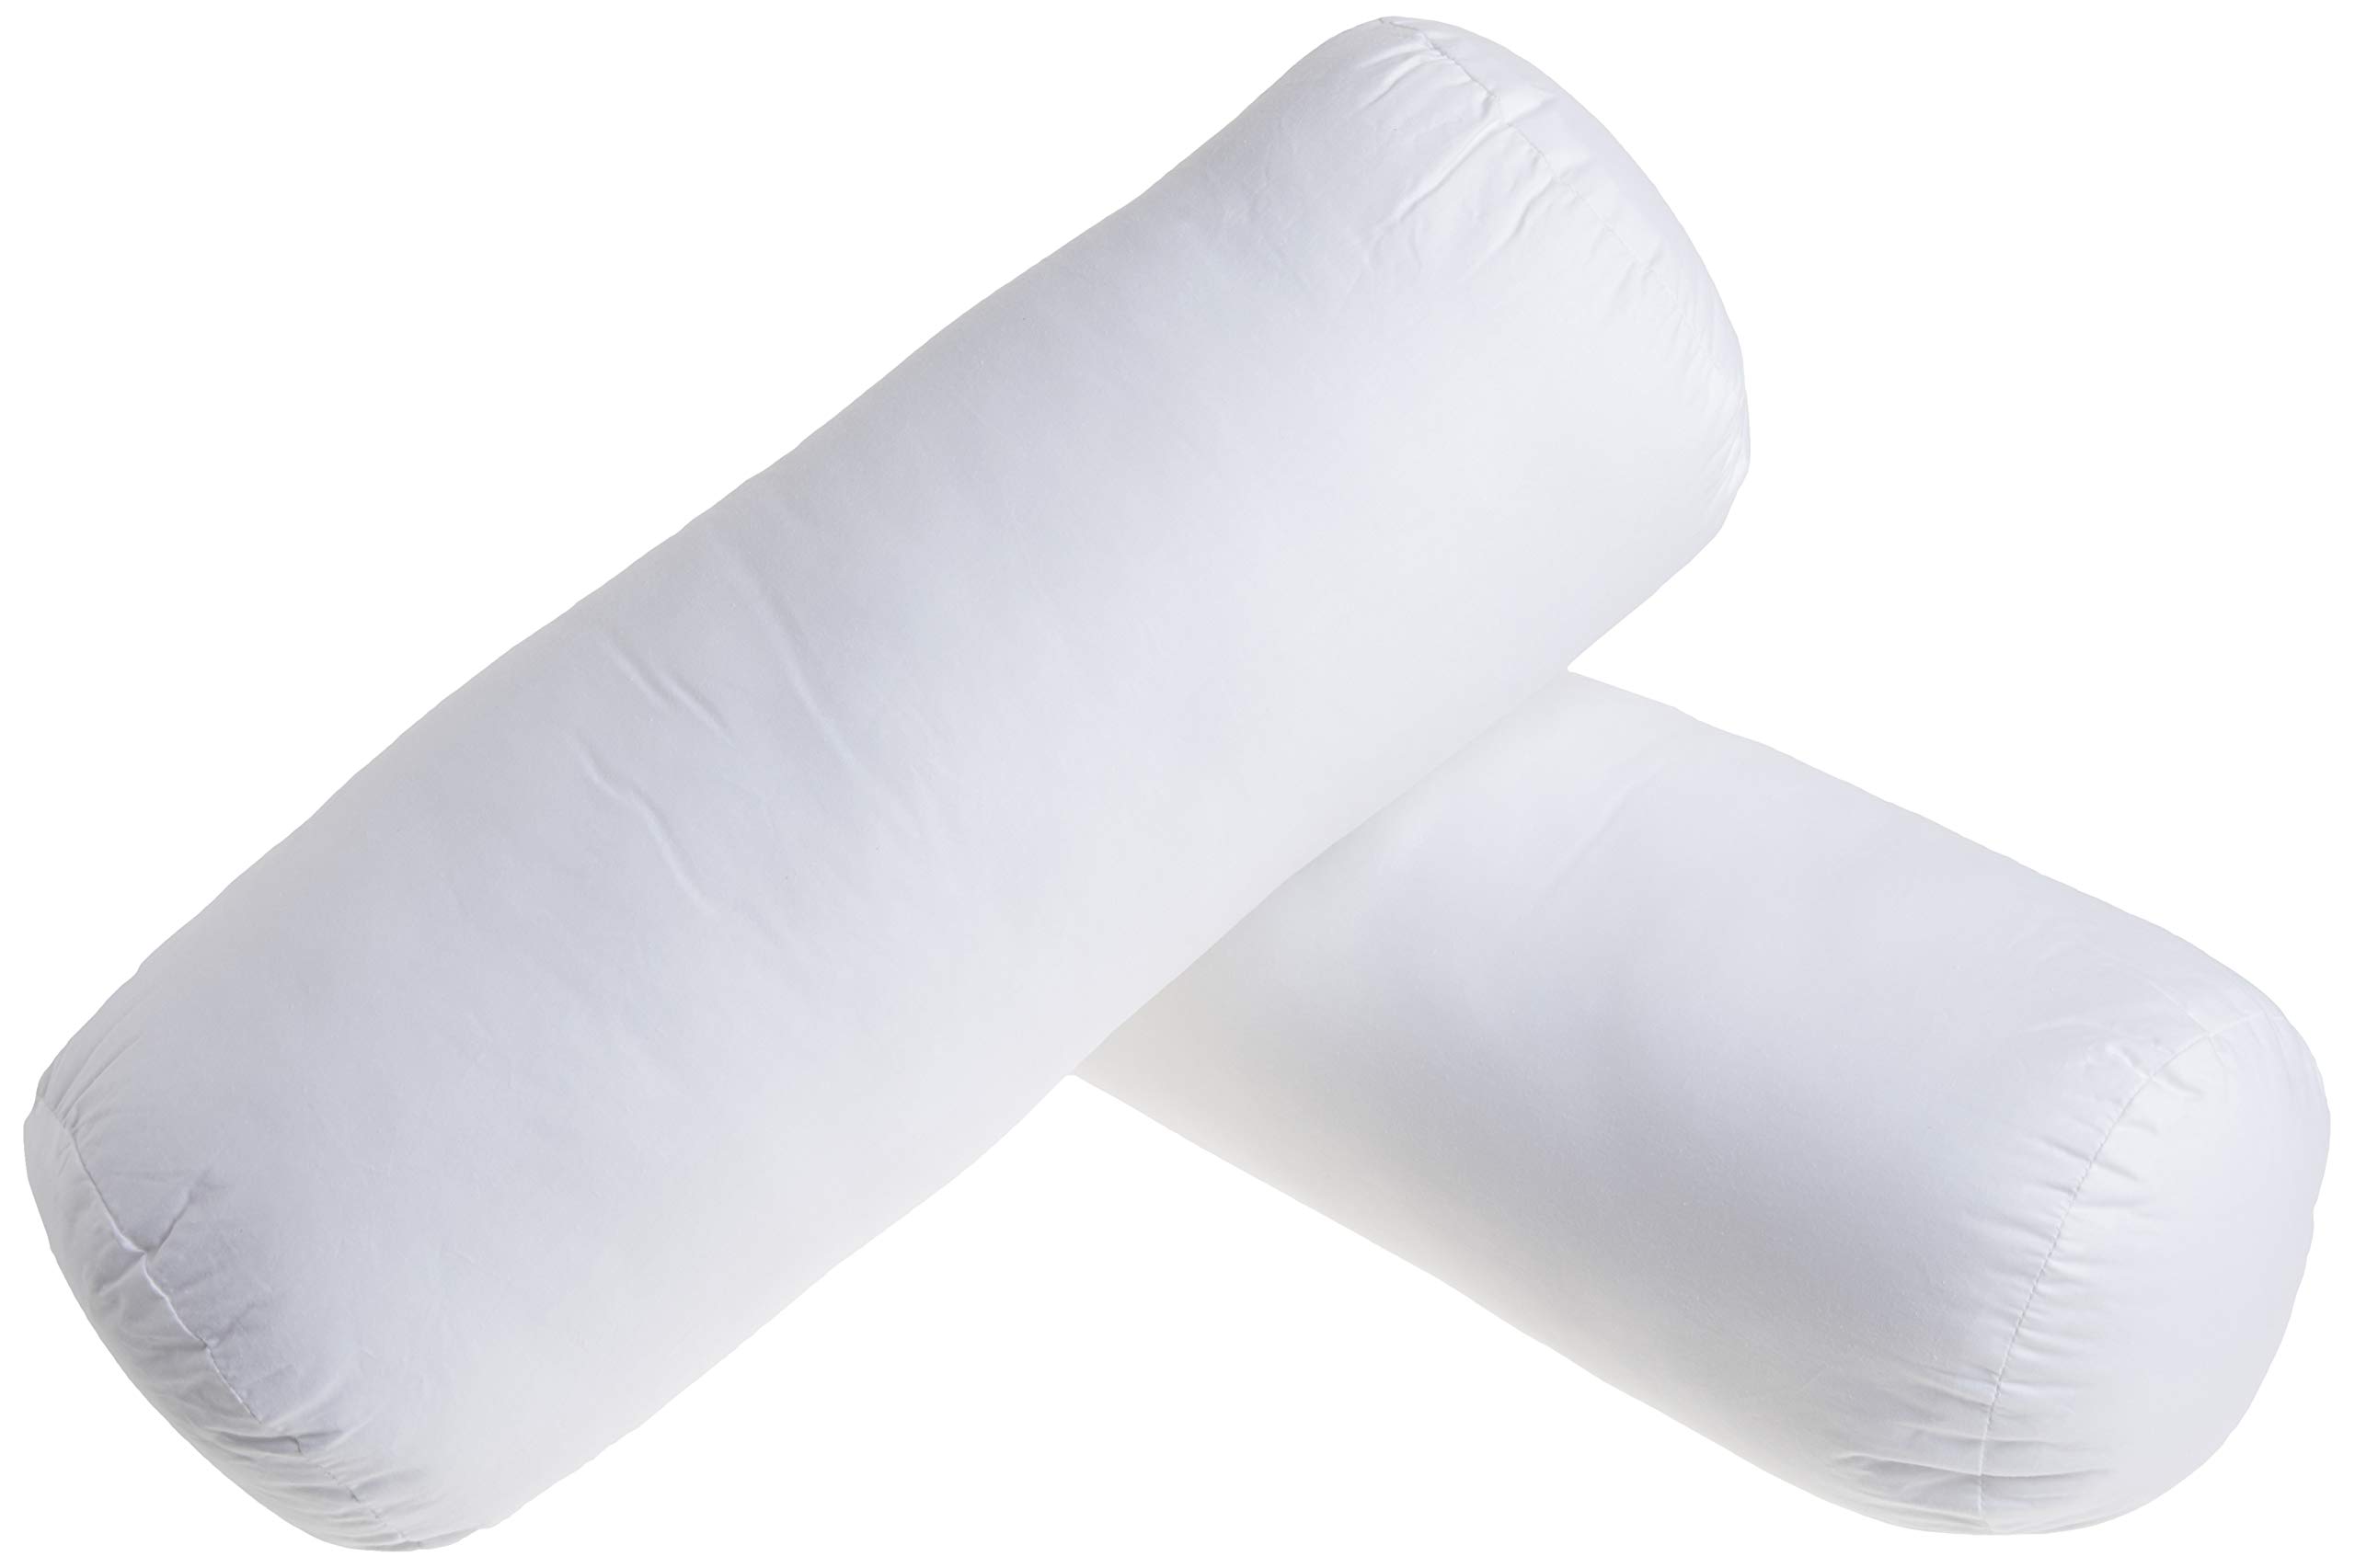 Newpoint 100-Percent Cotton 6 by 16 Neckroll Pillow Pairs, White